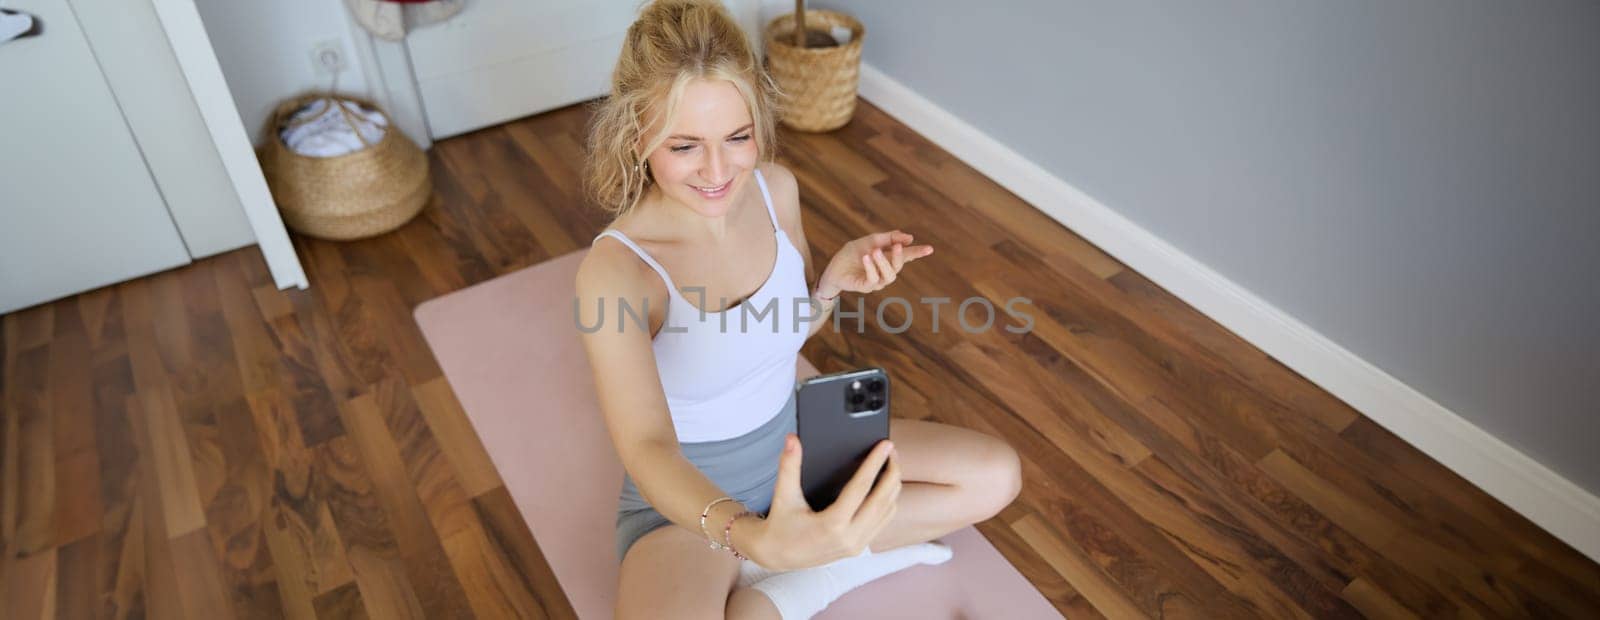 Portrait of young blogger, fitness instructor showing how to do exercises, sitting on yoga mat with smartphone, talking to followers on live stream.